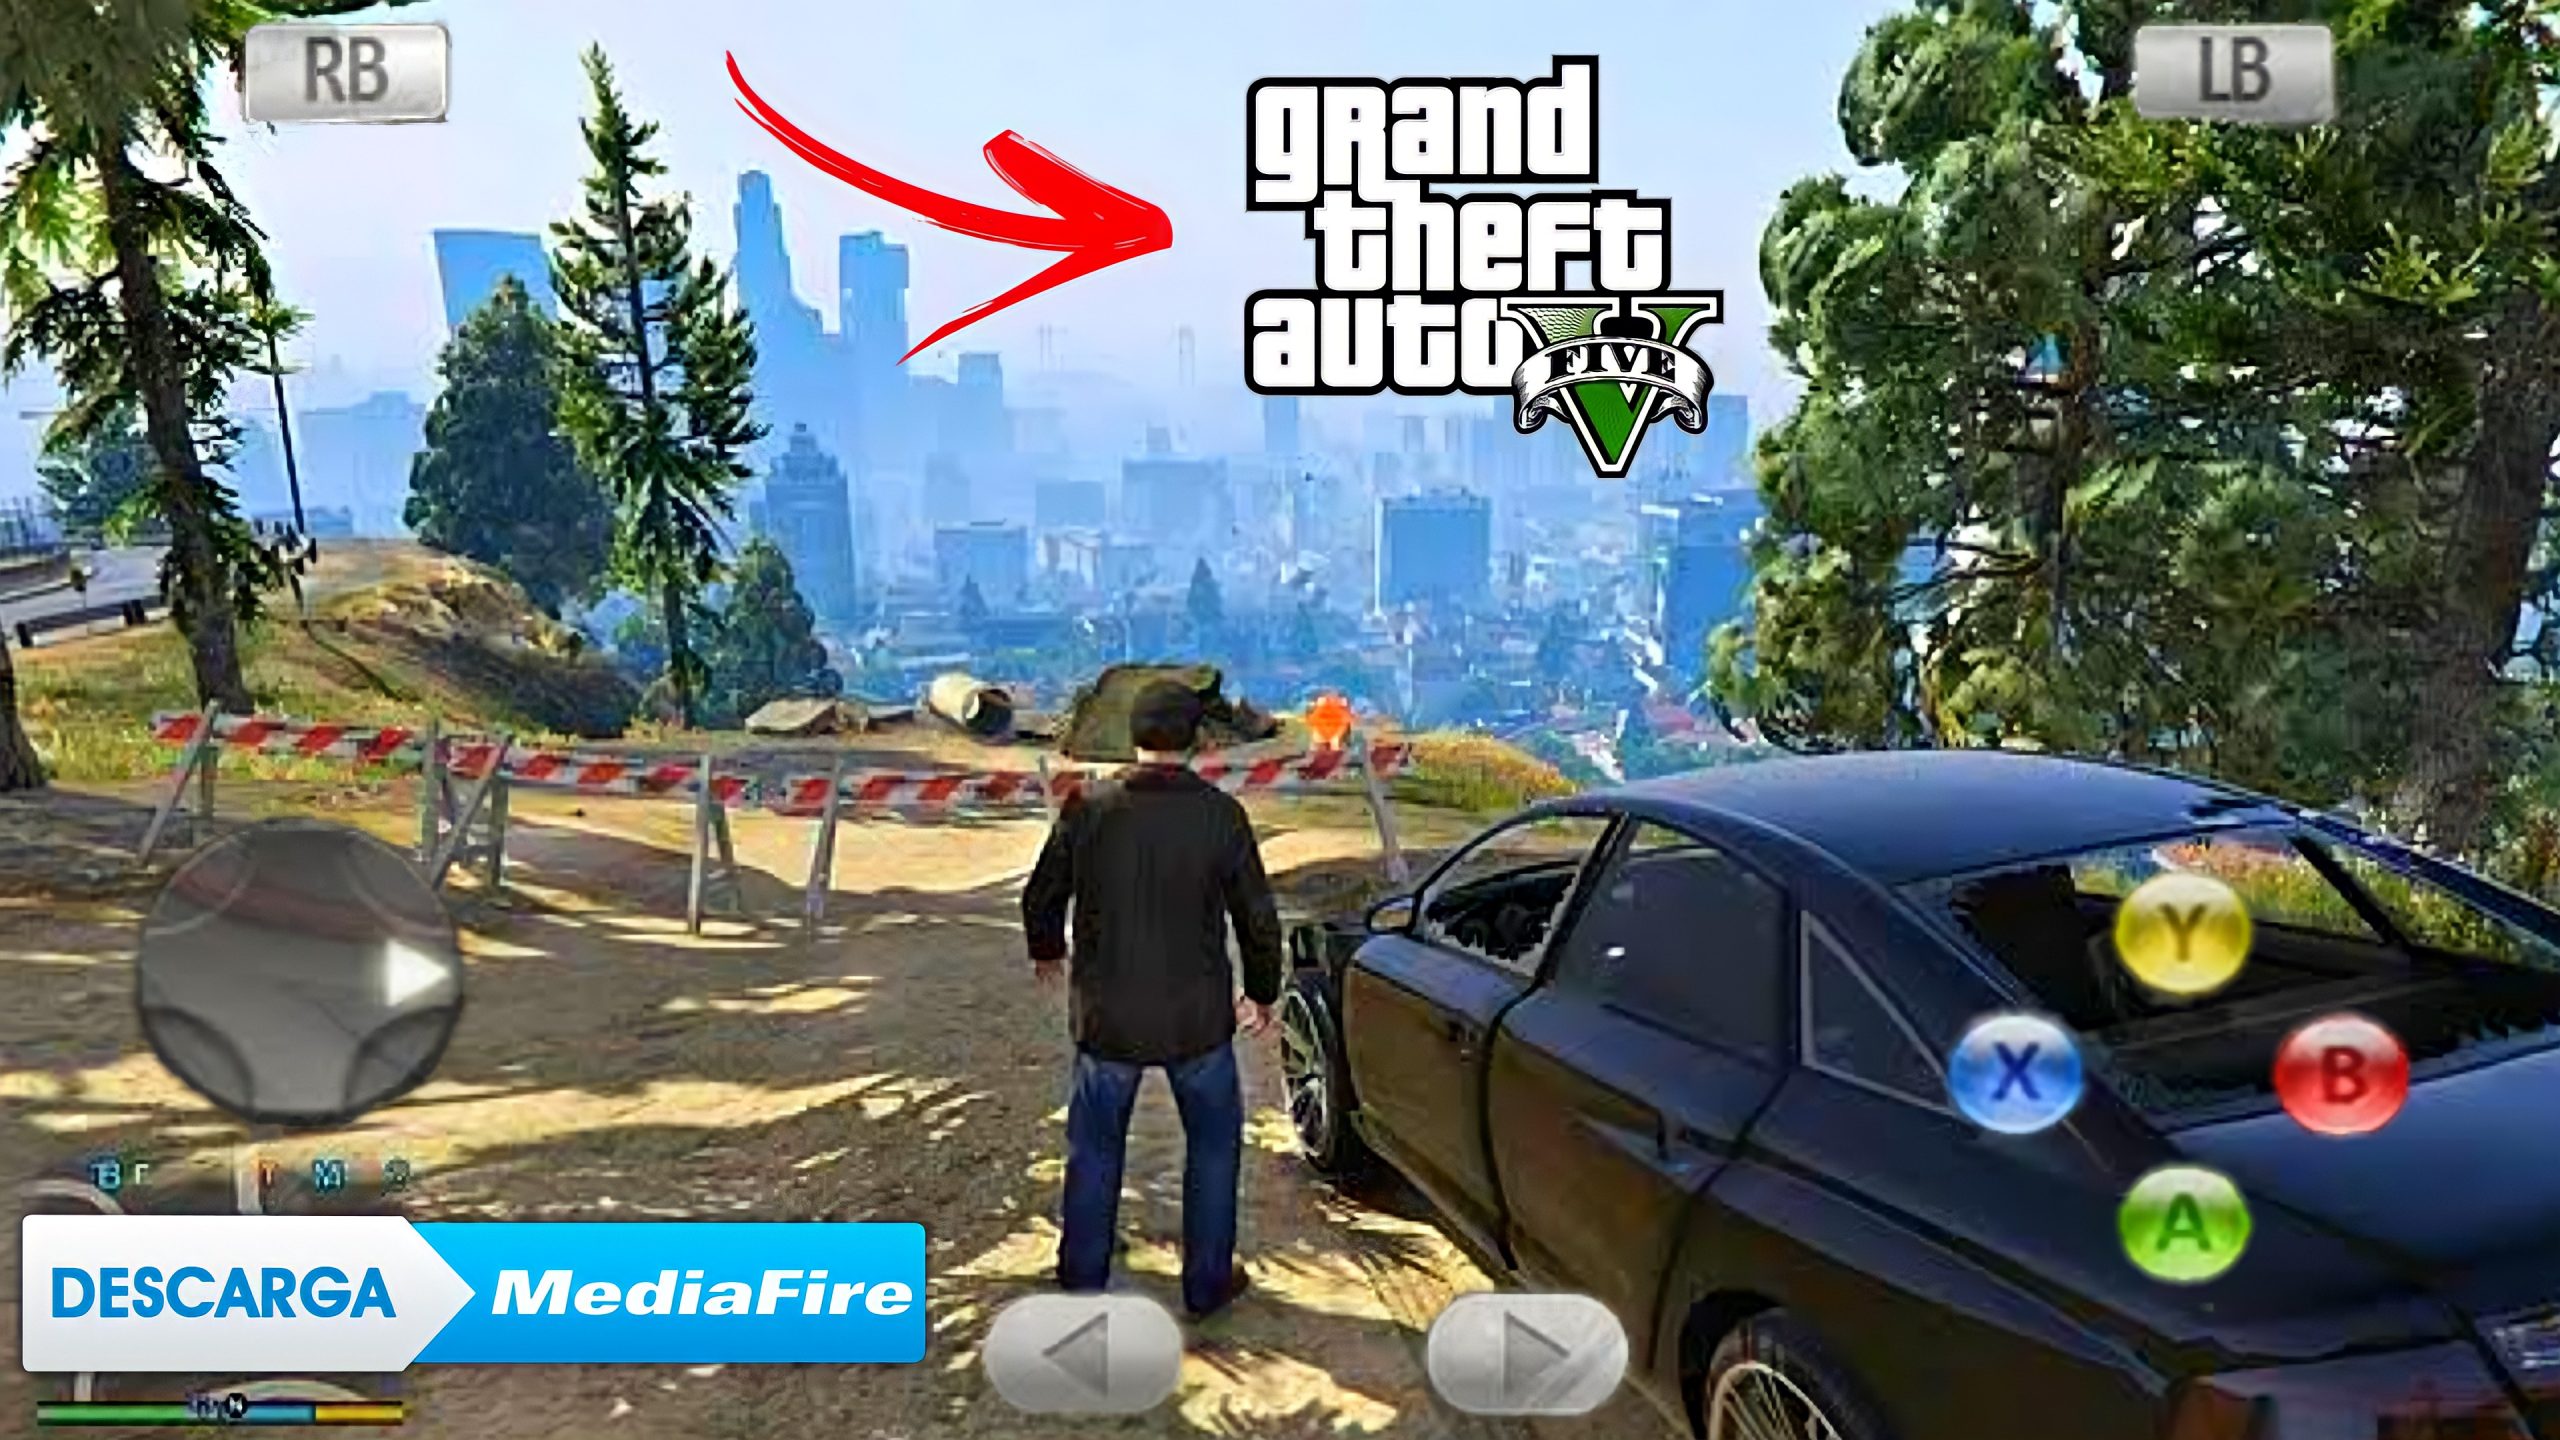 Download gta 5 for pc on mediafire